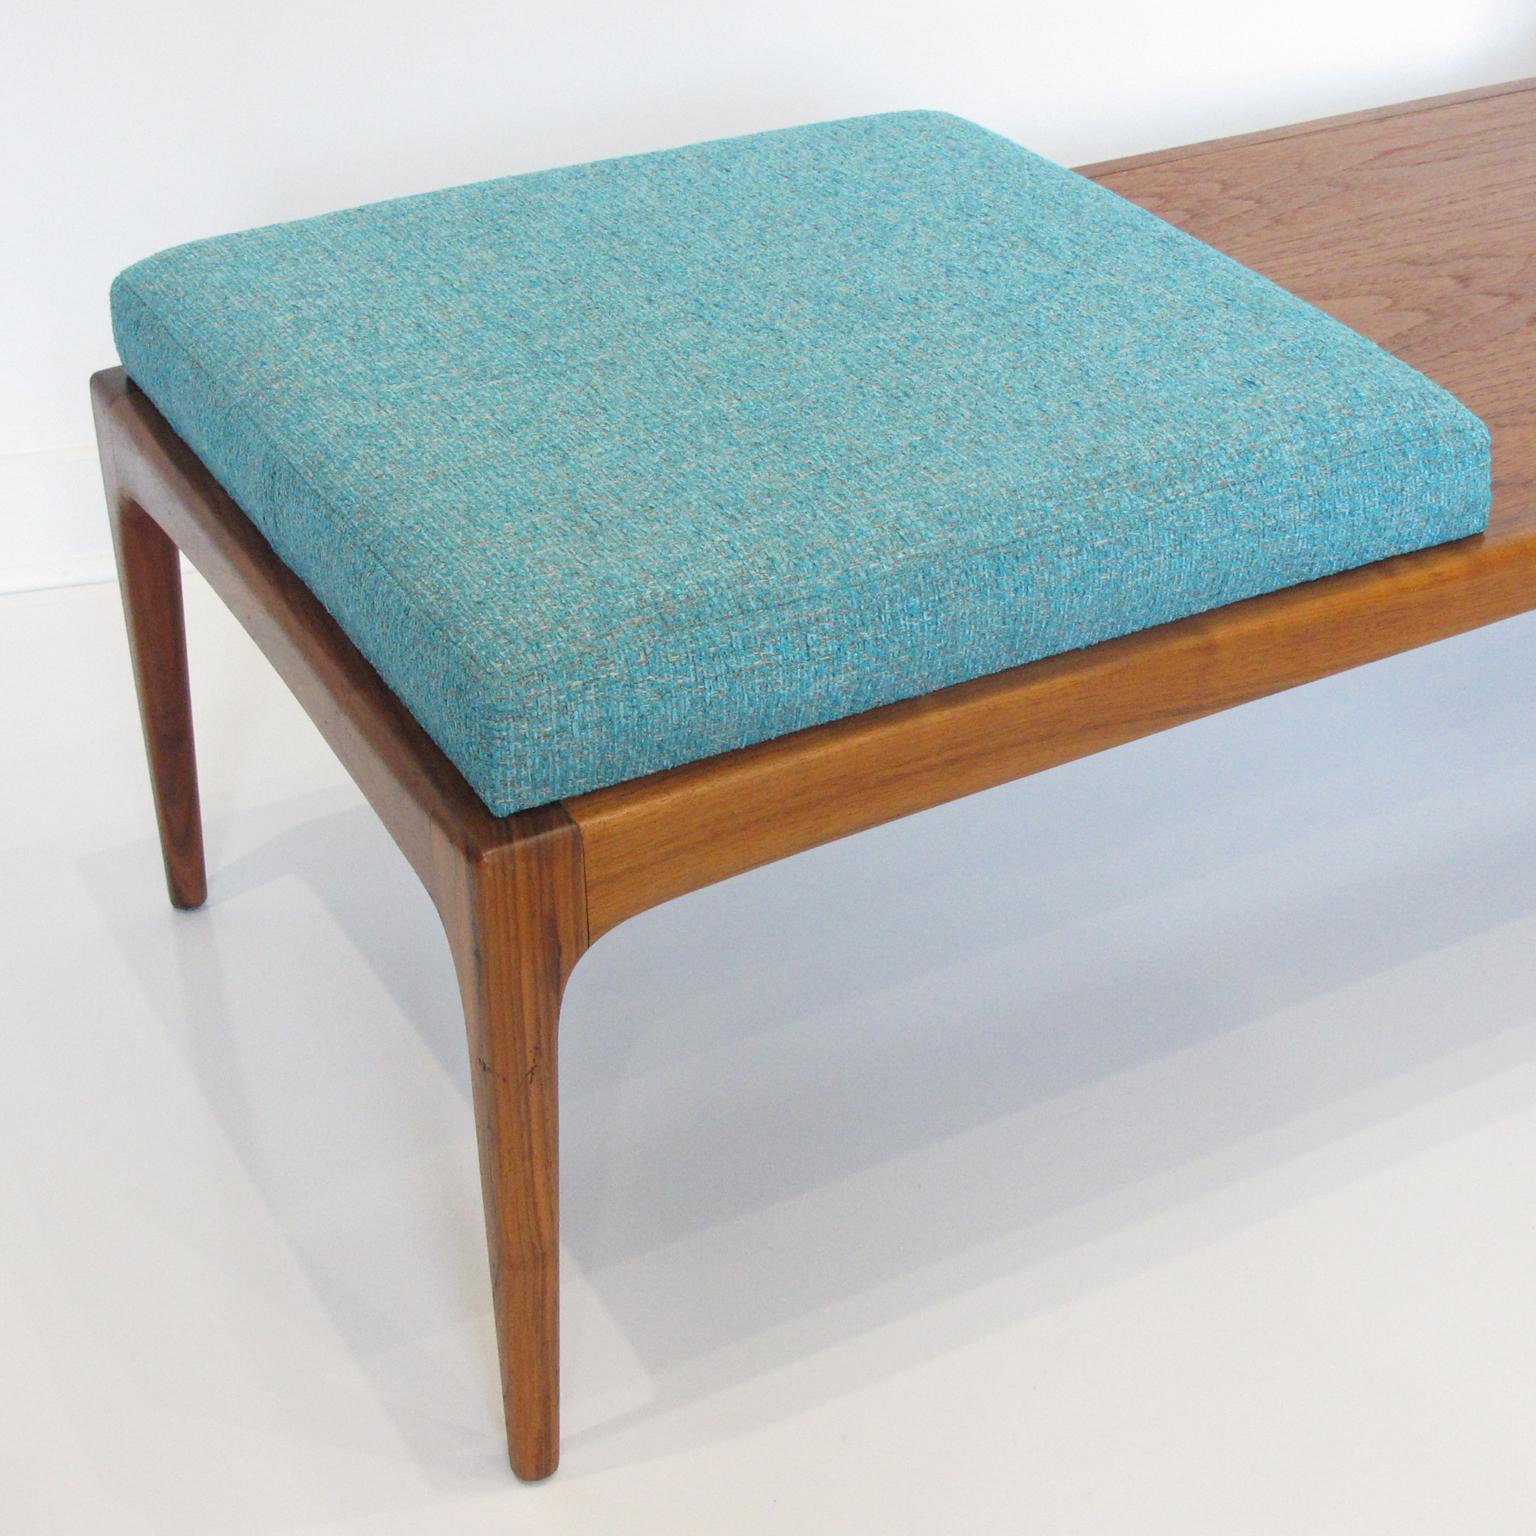 American Lane Furniture Modernist Turquoise Fabric Upholstered Long Walnut Bench